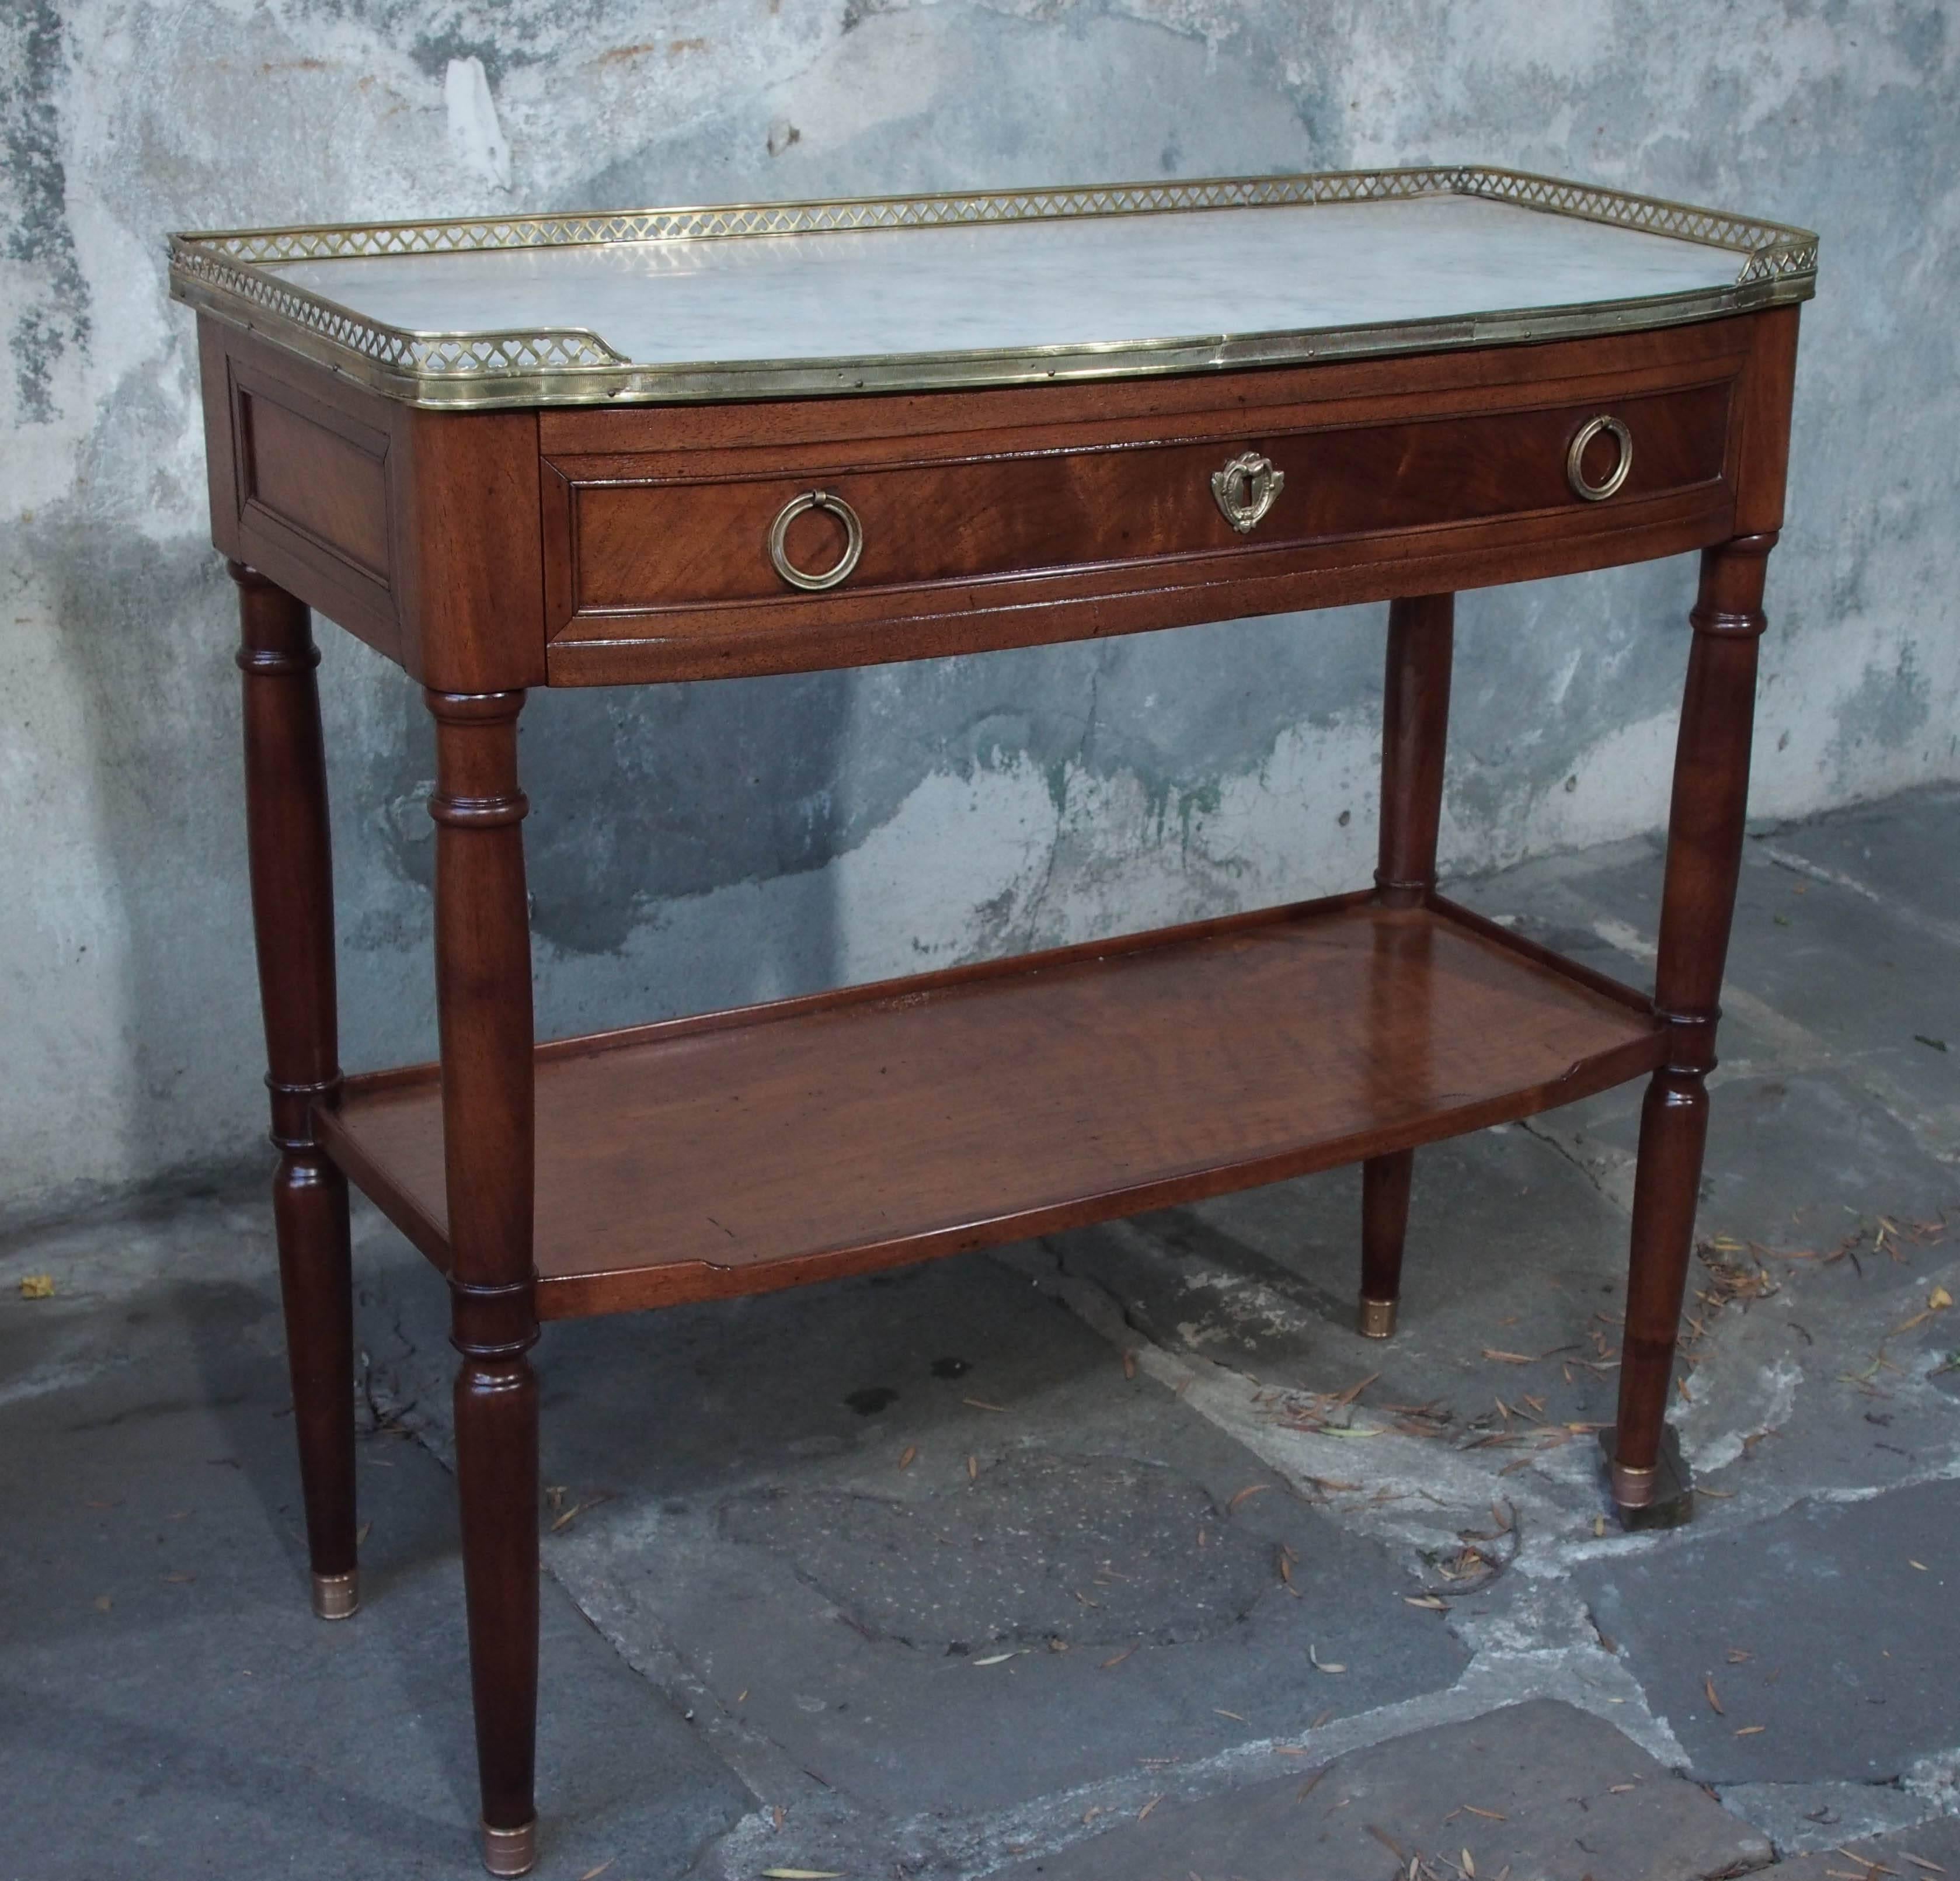 Small scale French Louis XVI period mahogany console with shelf, drawer and white marble top with brass gallery